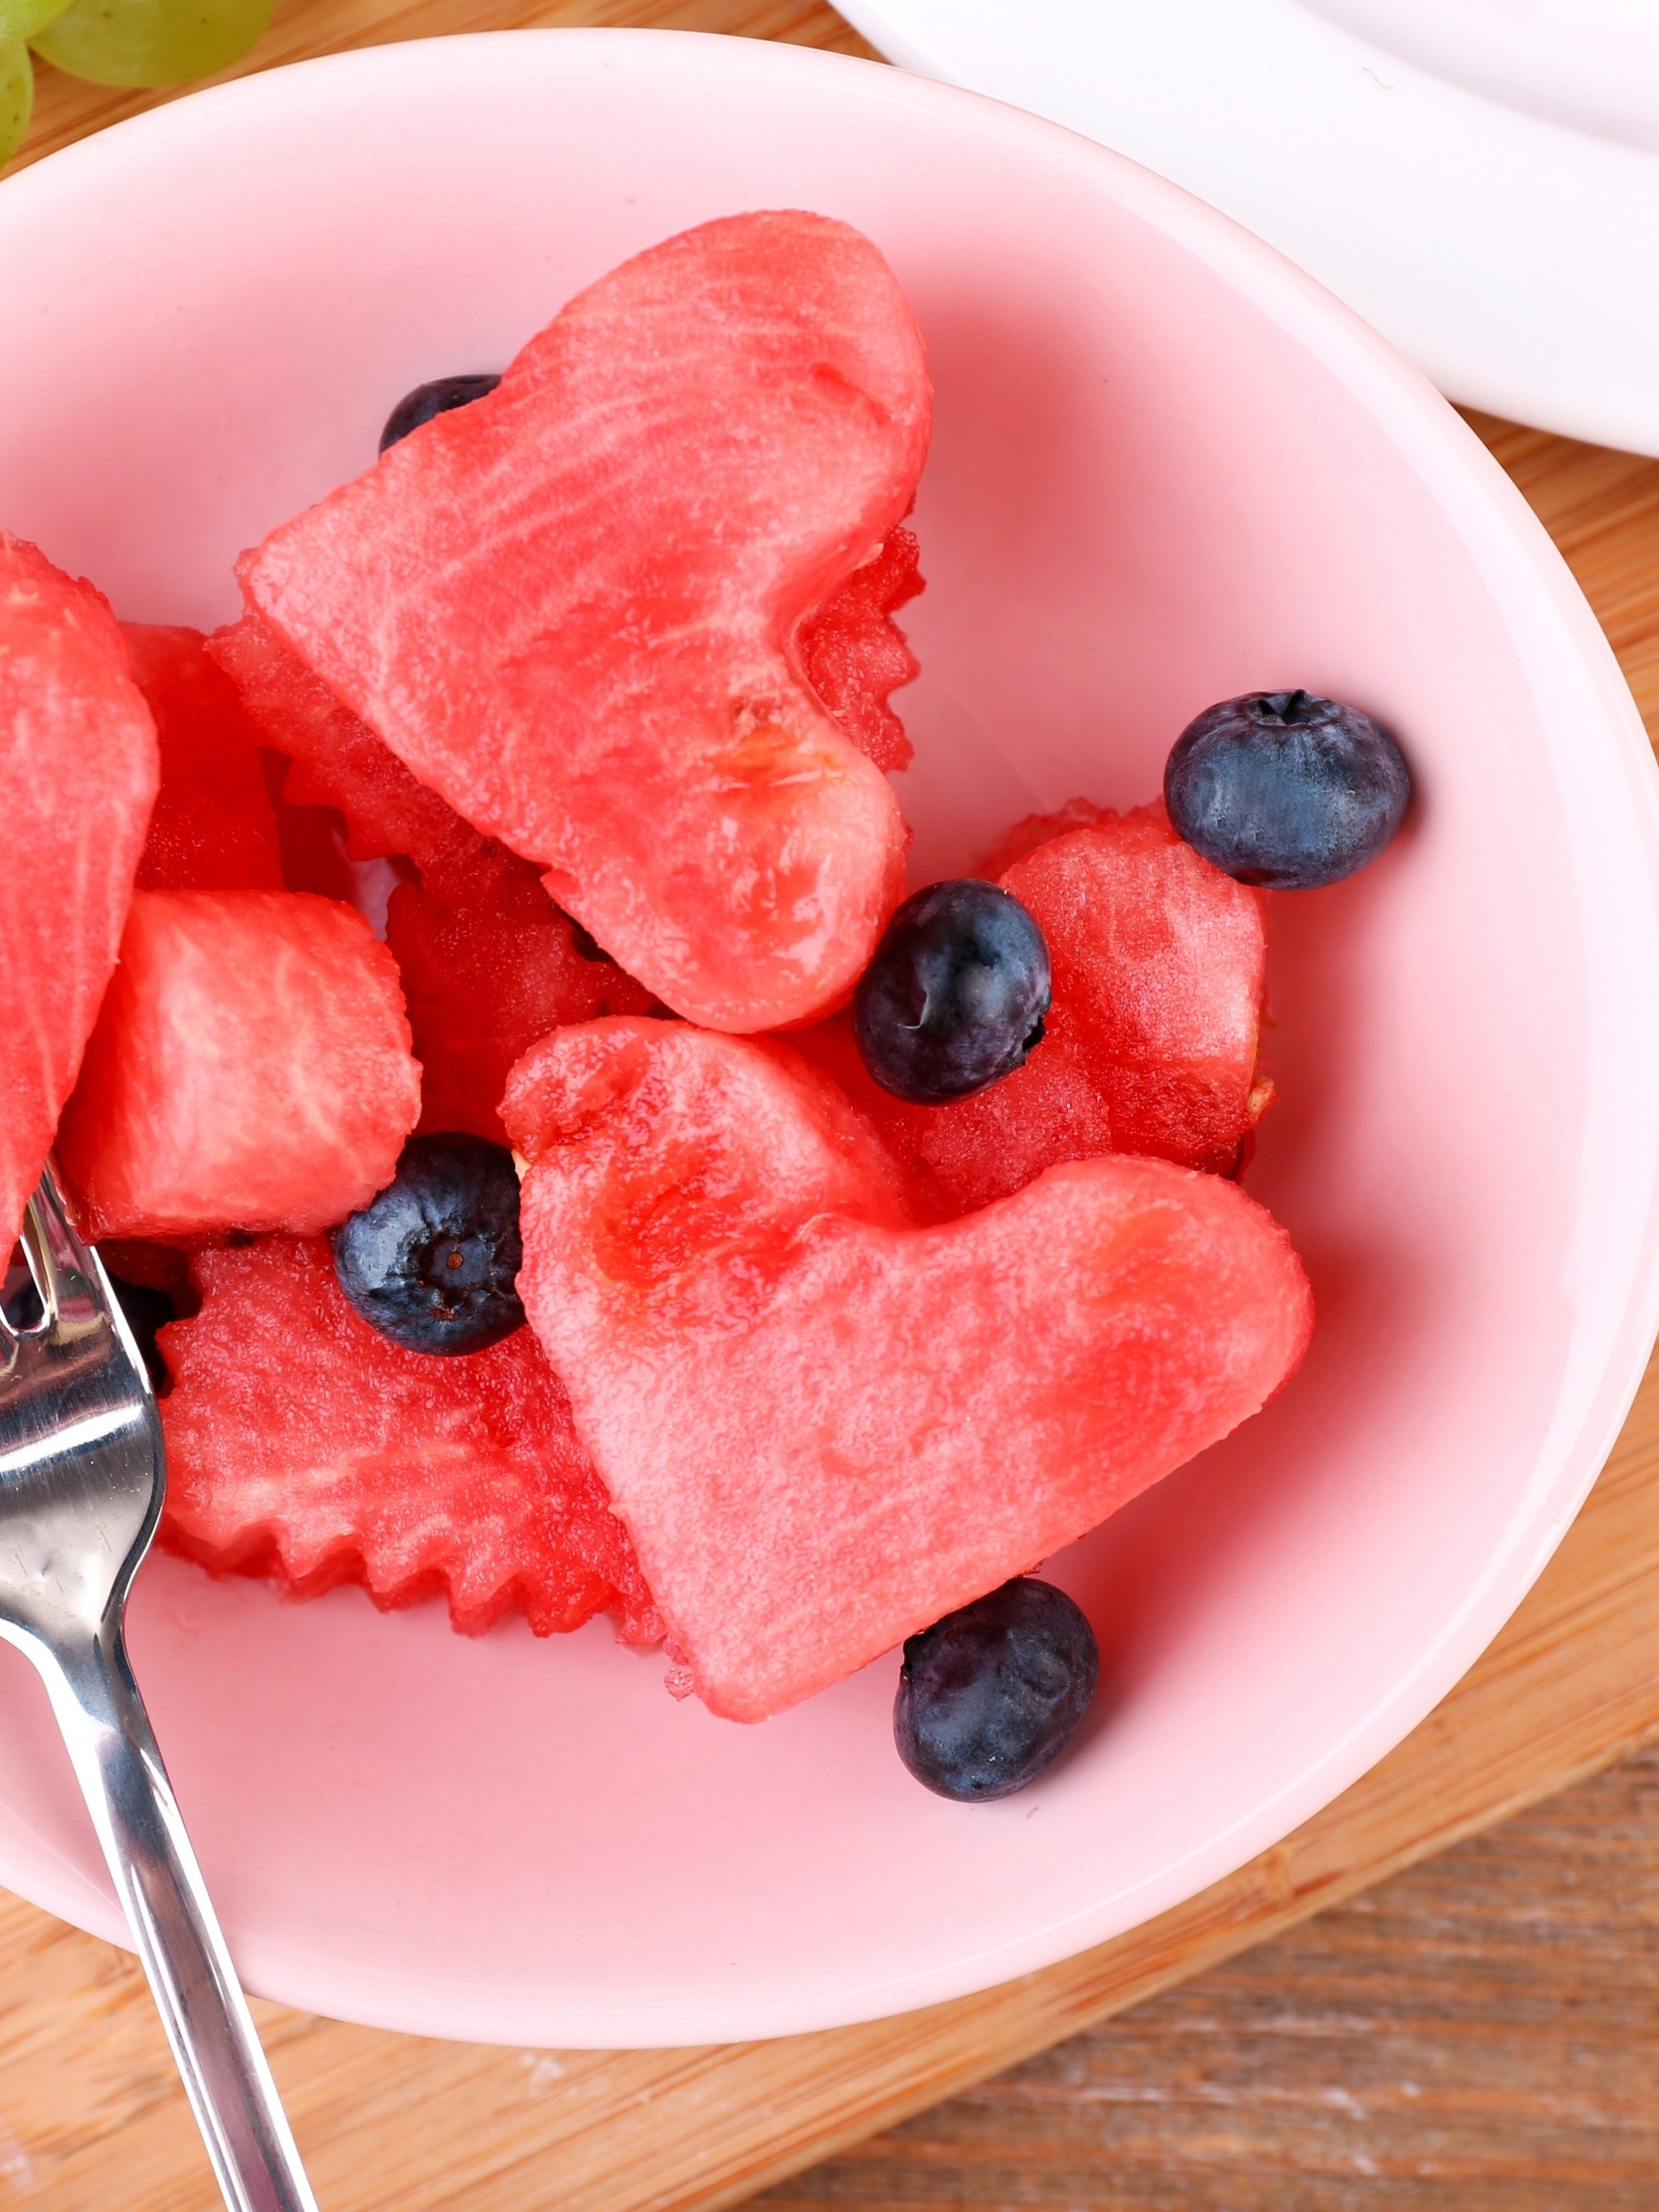 Image: Watermelon, slices, berries, hearts, plate, fork, food, summer